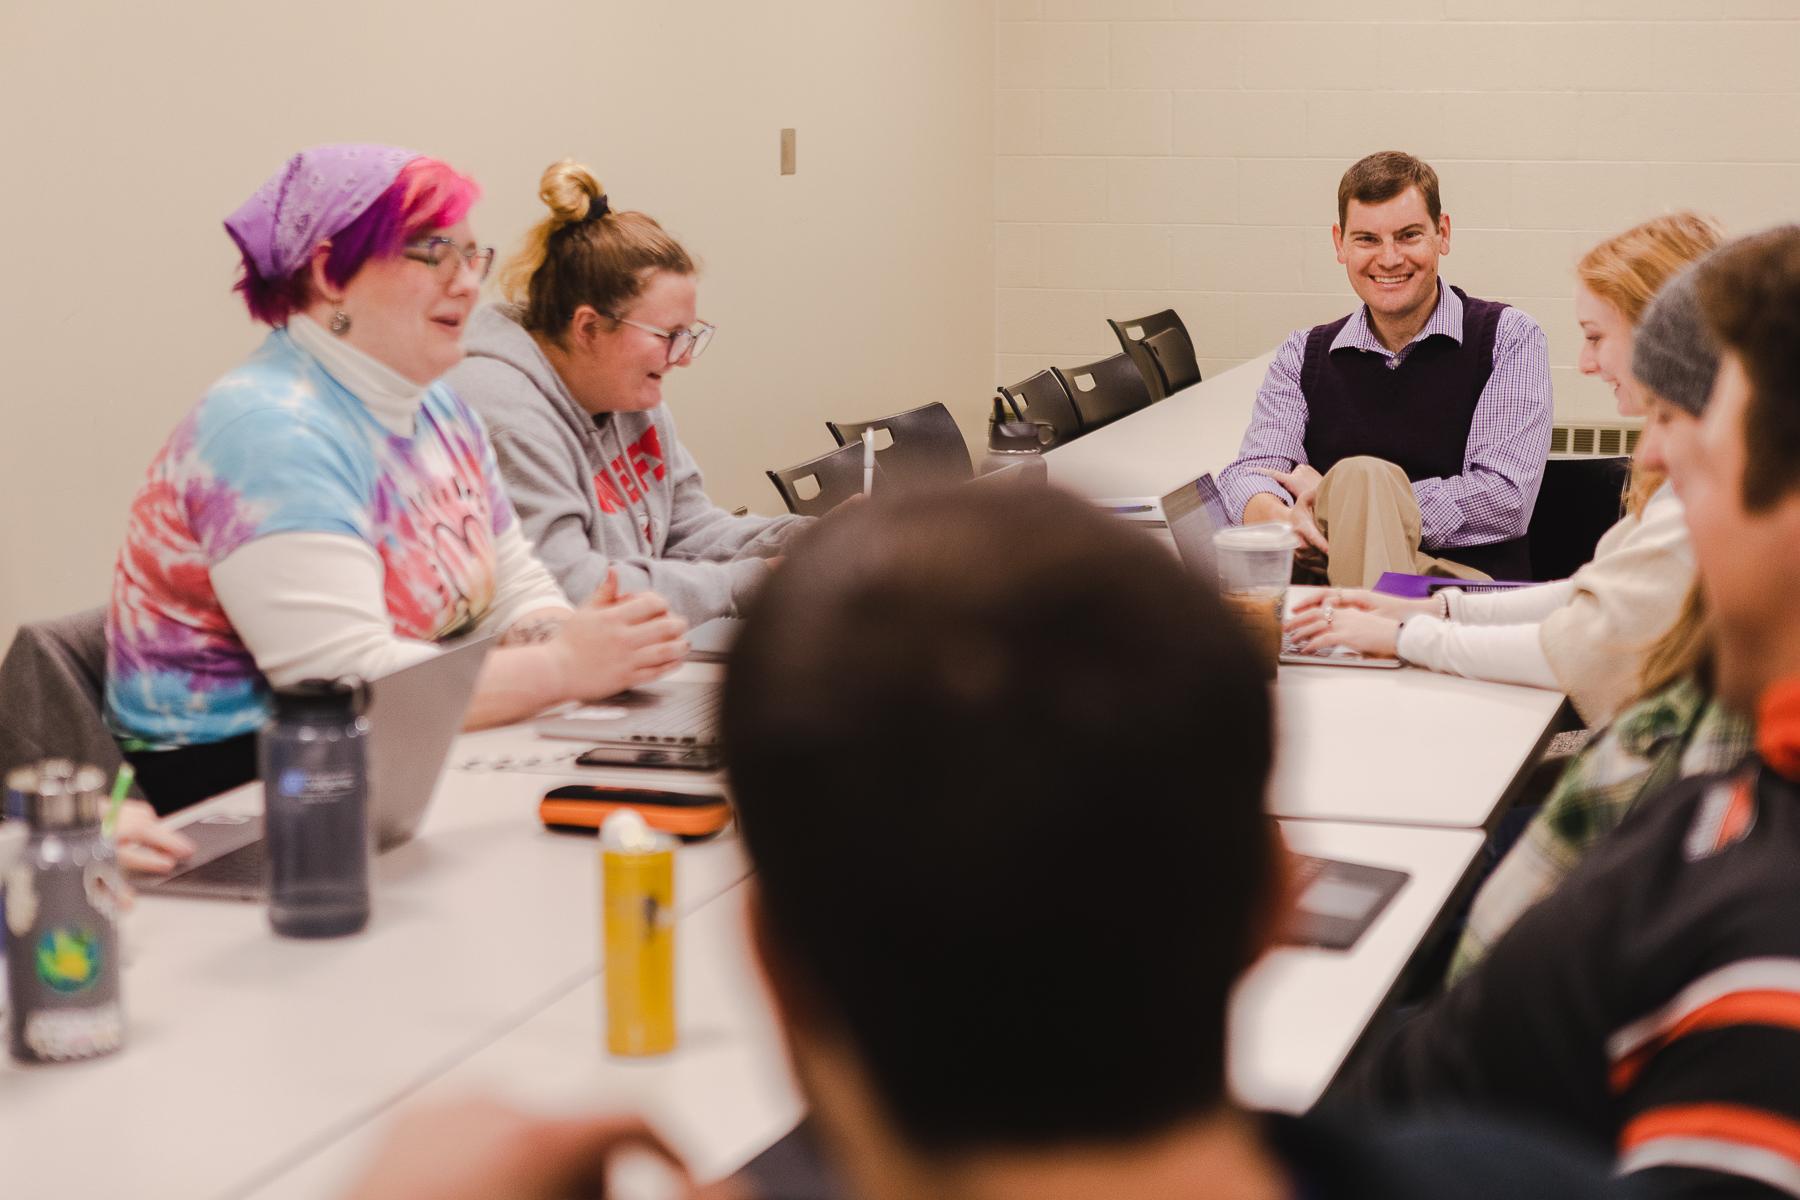 Dr. Timothy Hill, professor of political science, sits at the end of a long table with laughing and smiling students during a class.